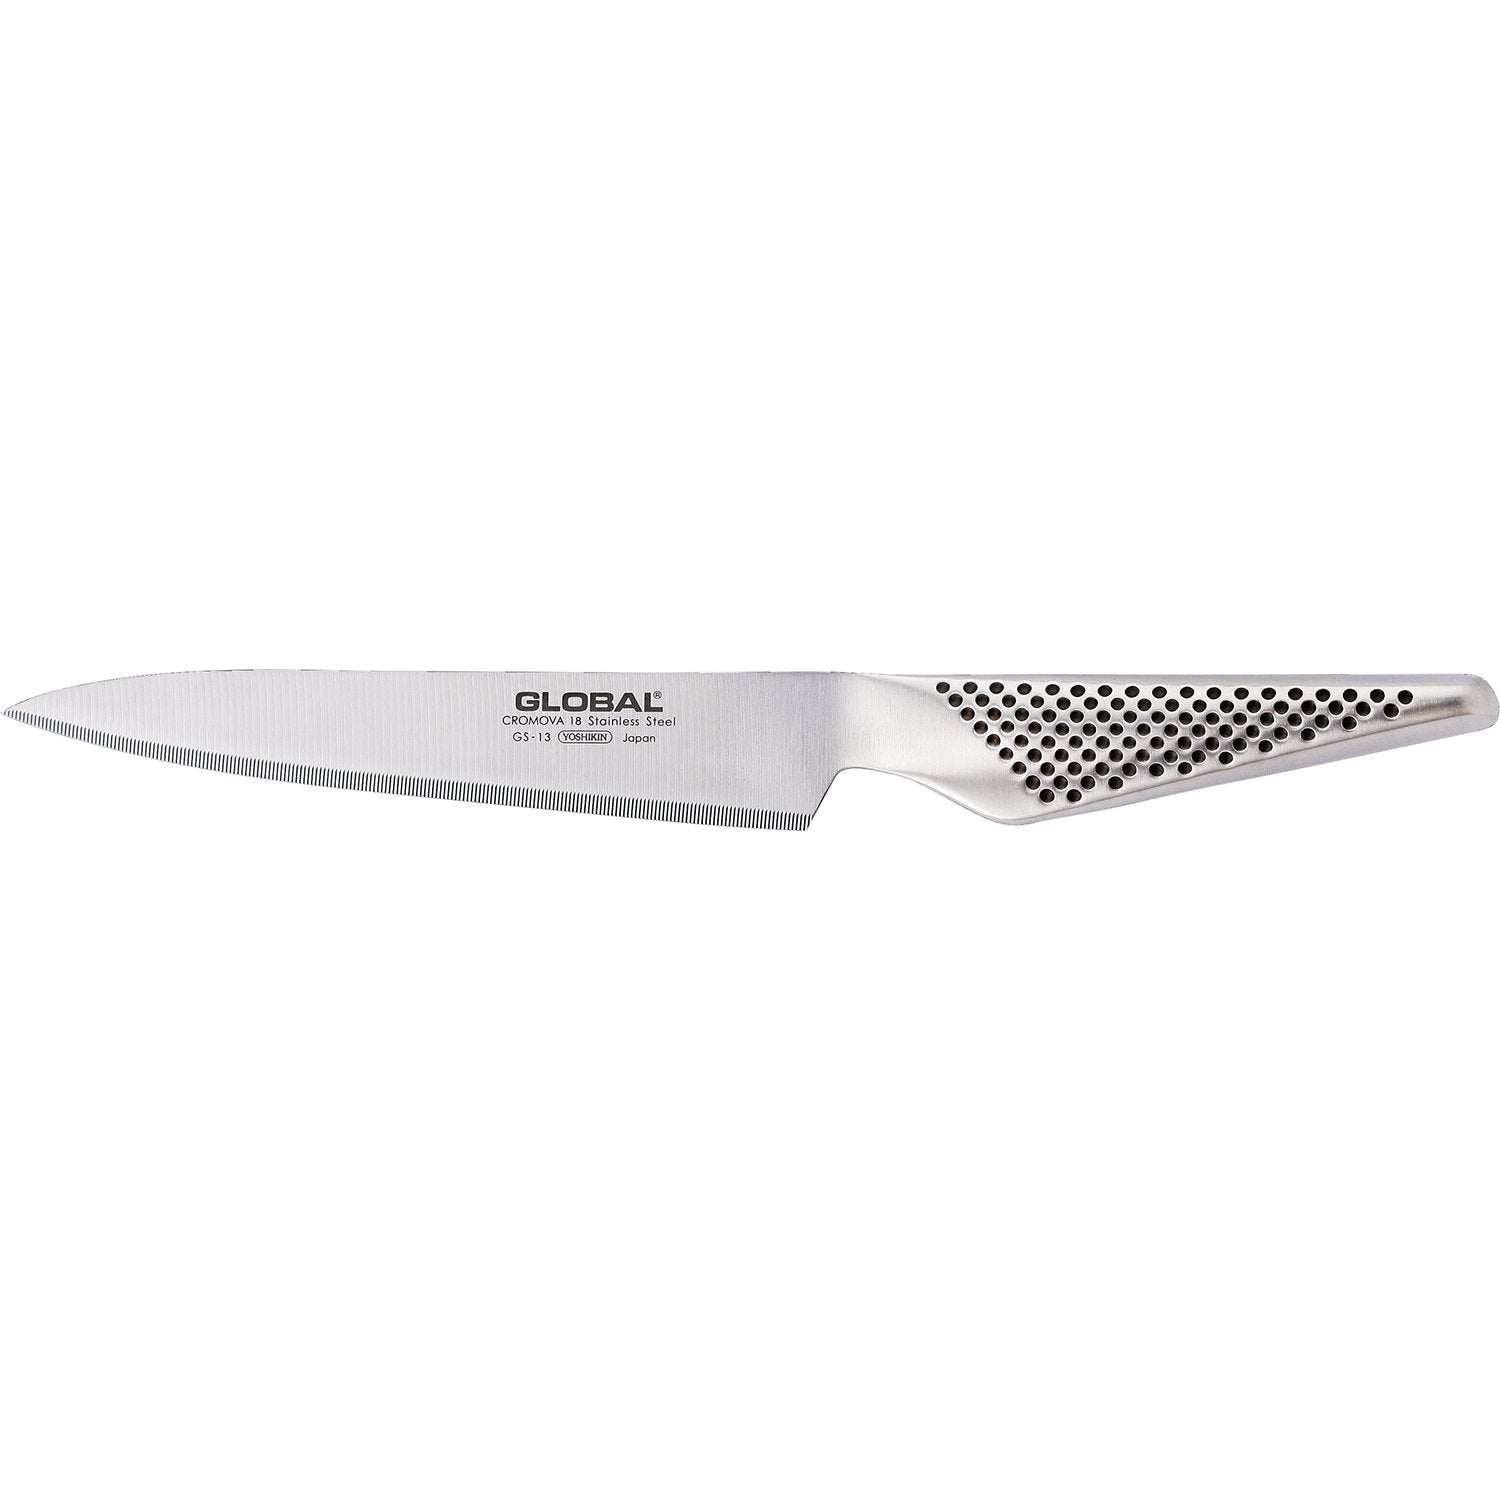 Global Gs 13 R Universal Knife Toothed, 15 Cm